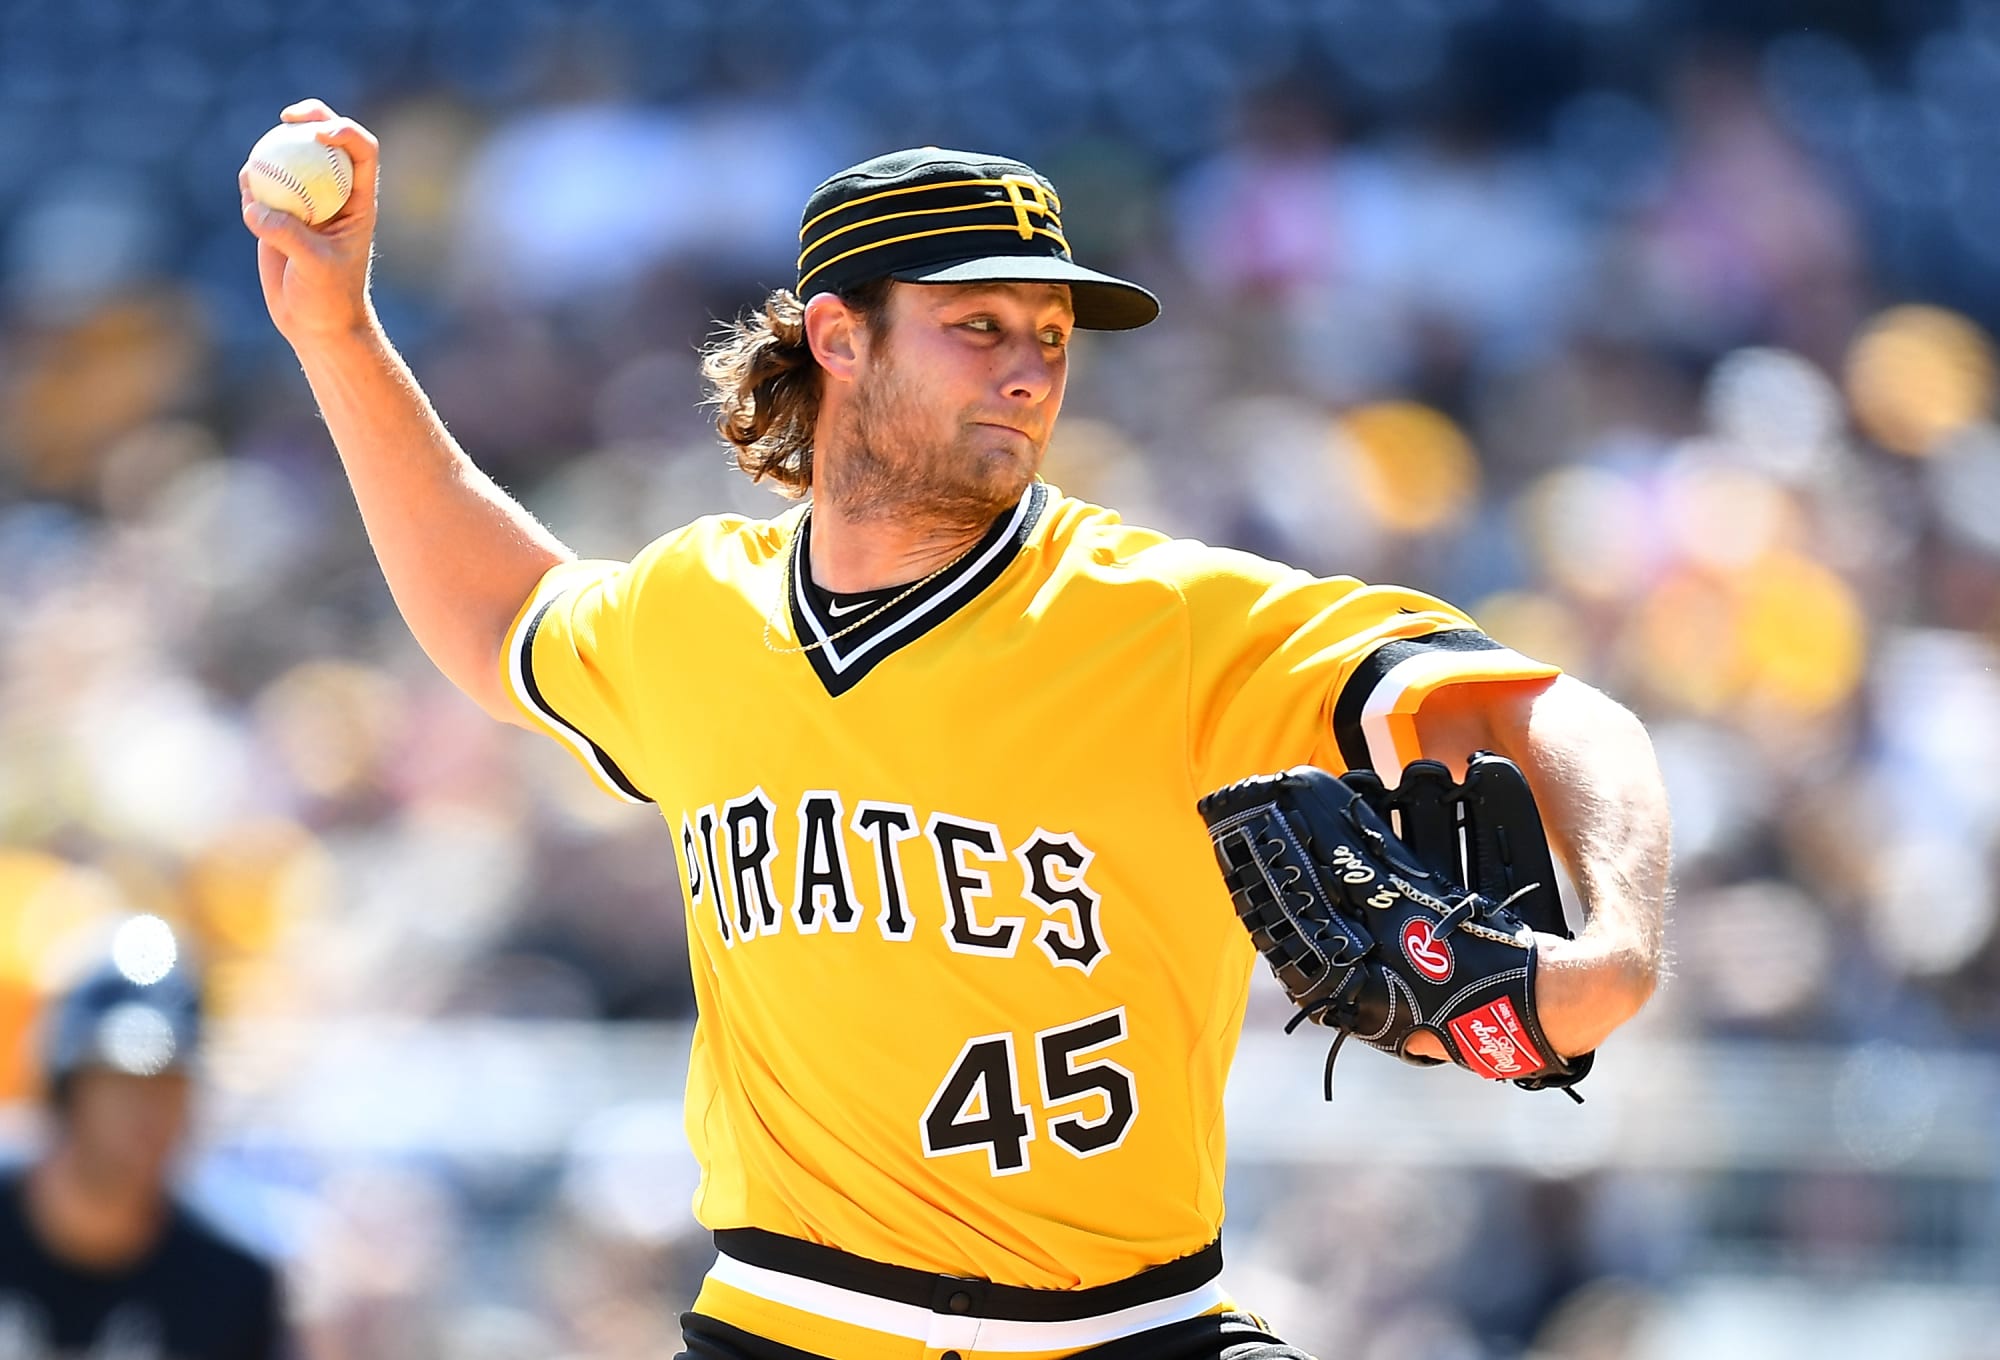 Excited' Gerrit Cole introduced as newest Houston Astros ace - ABC13 Houston